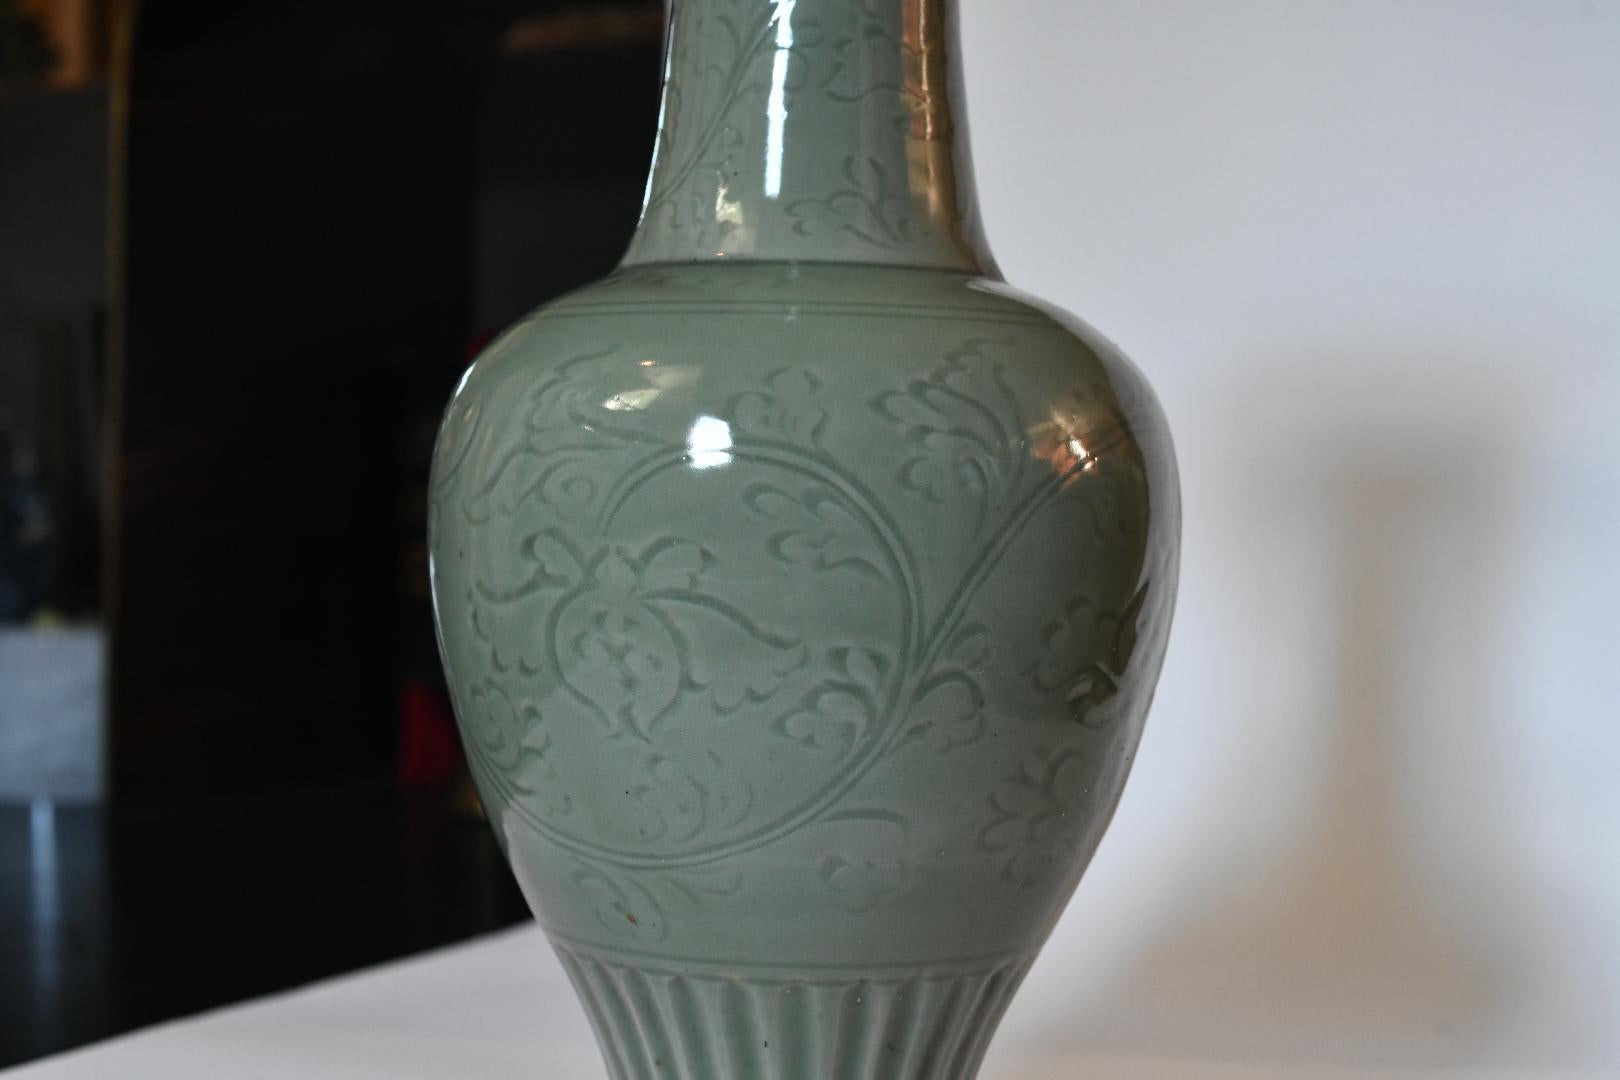 Pair of celadon glazed porcelain vases mounted as lamps.
To the top of porcelain: 19.75